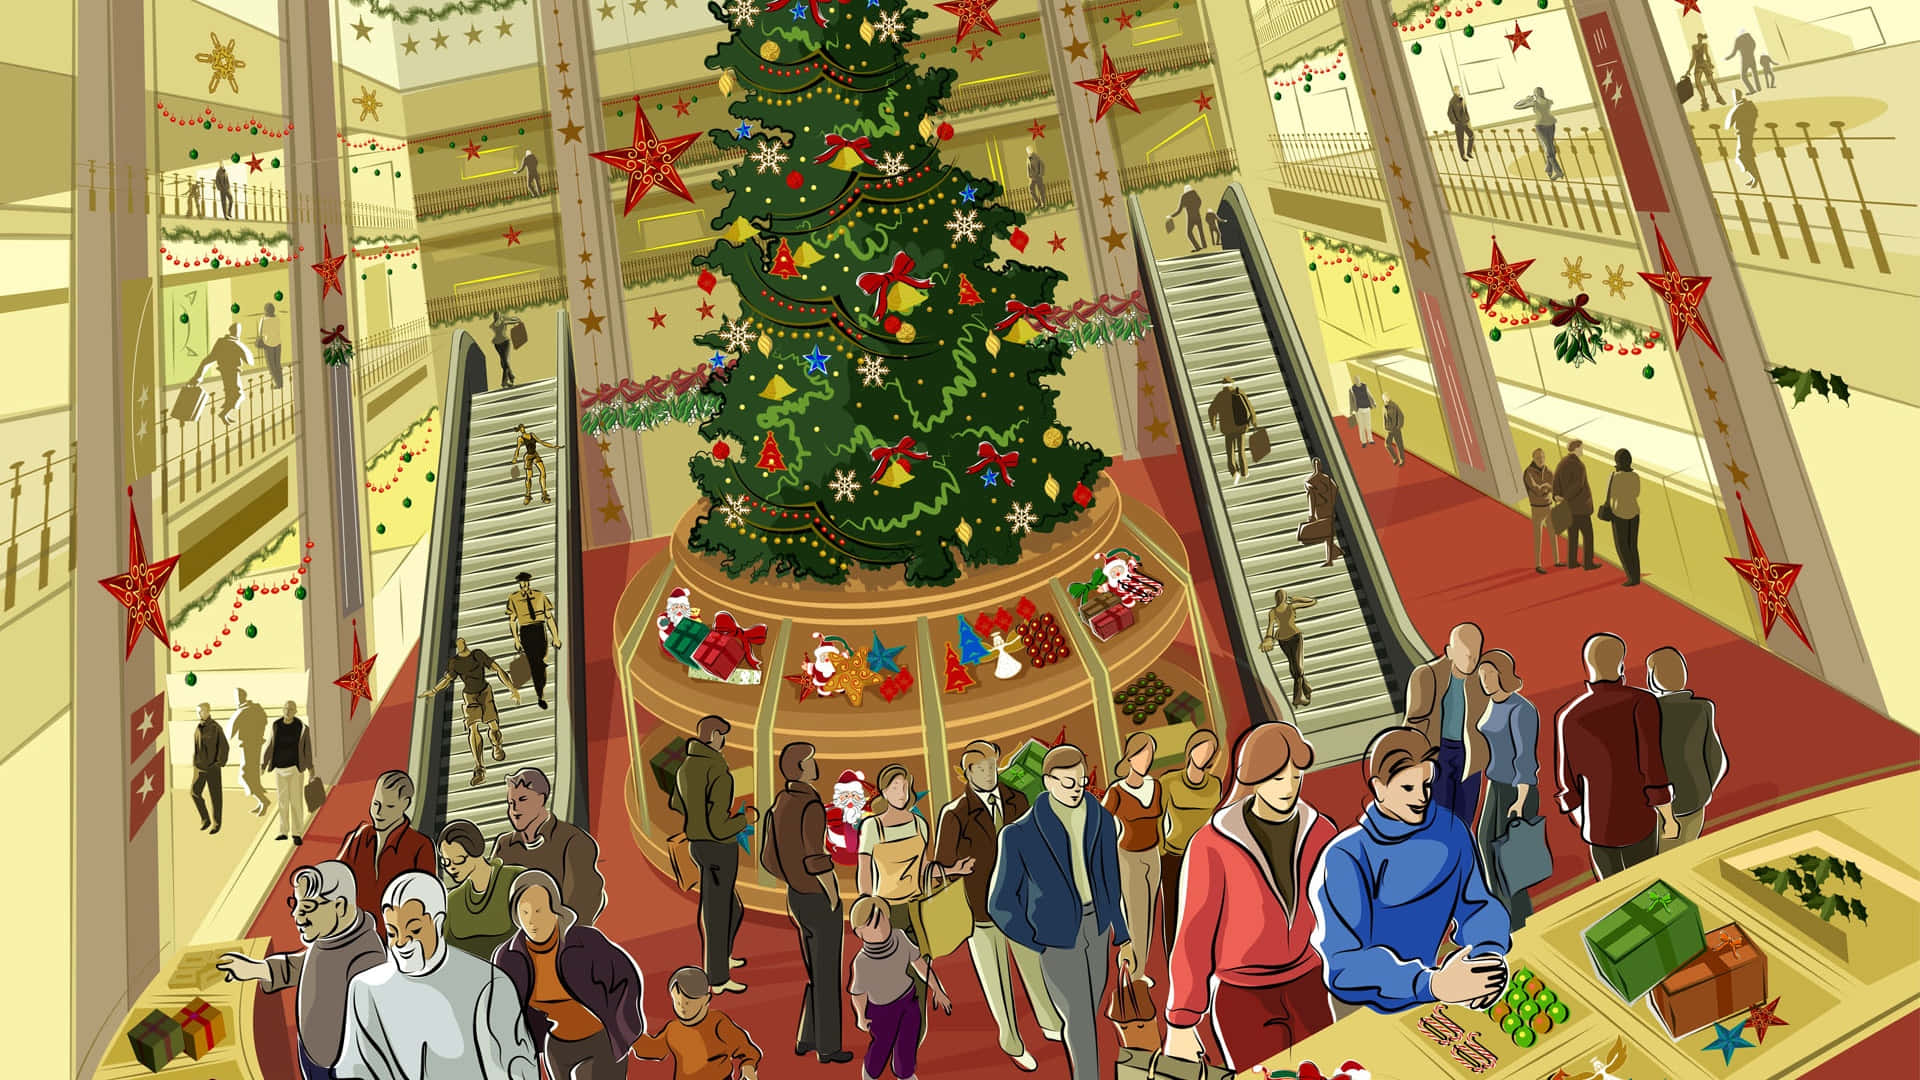 Free Vectors  Instore background illustration of a shopping mall